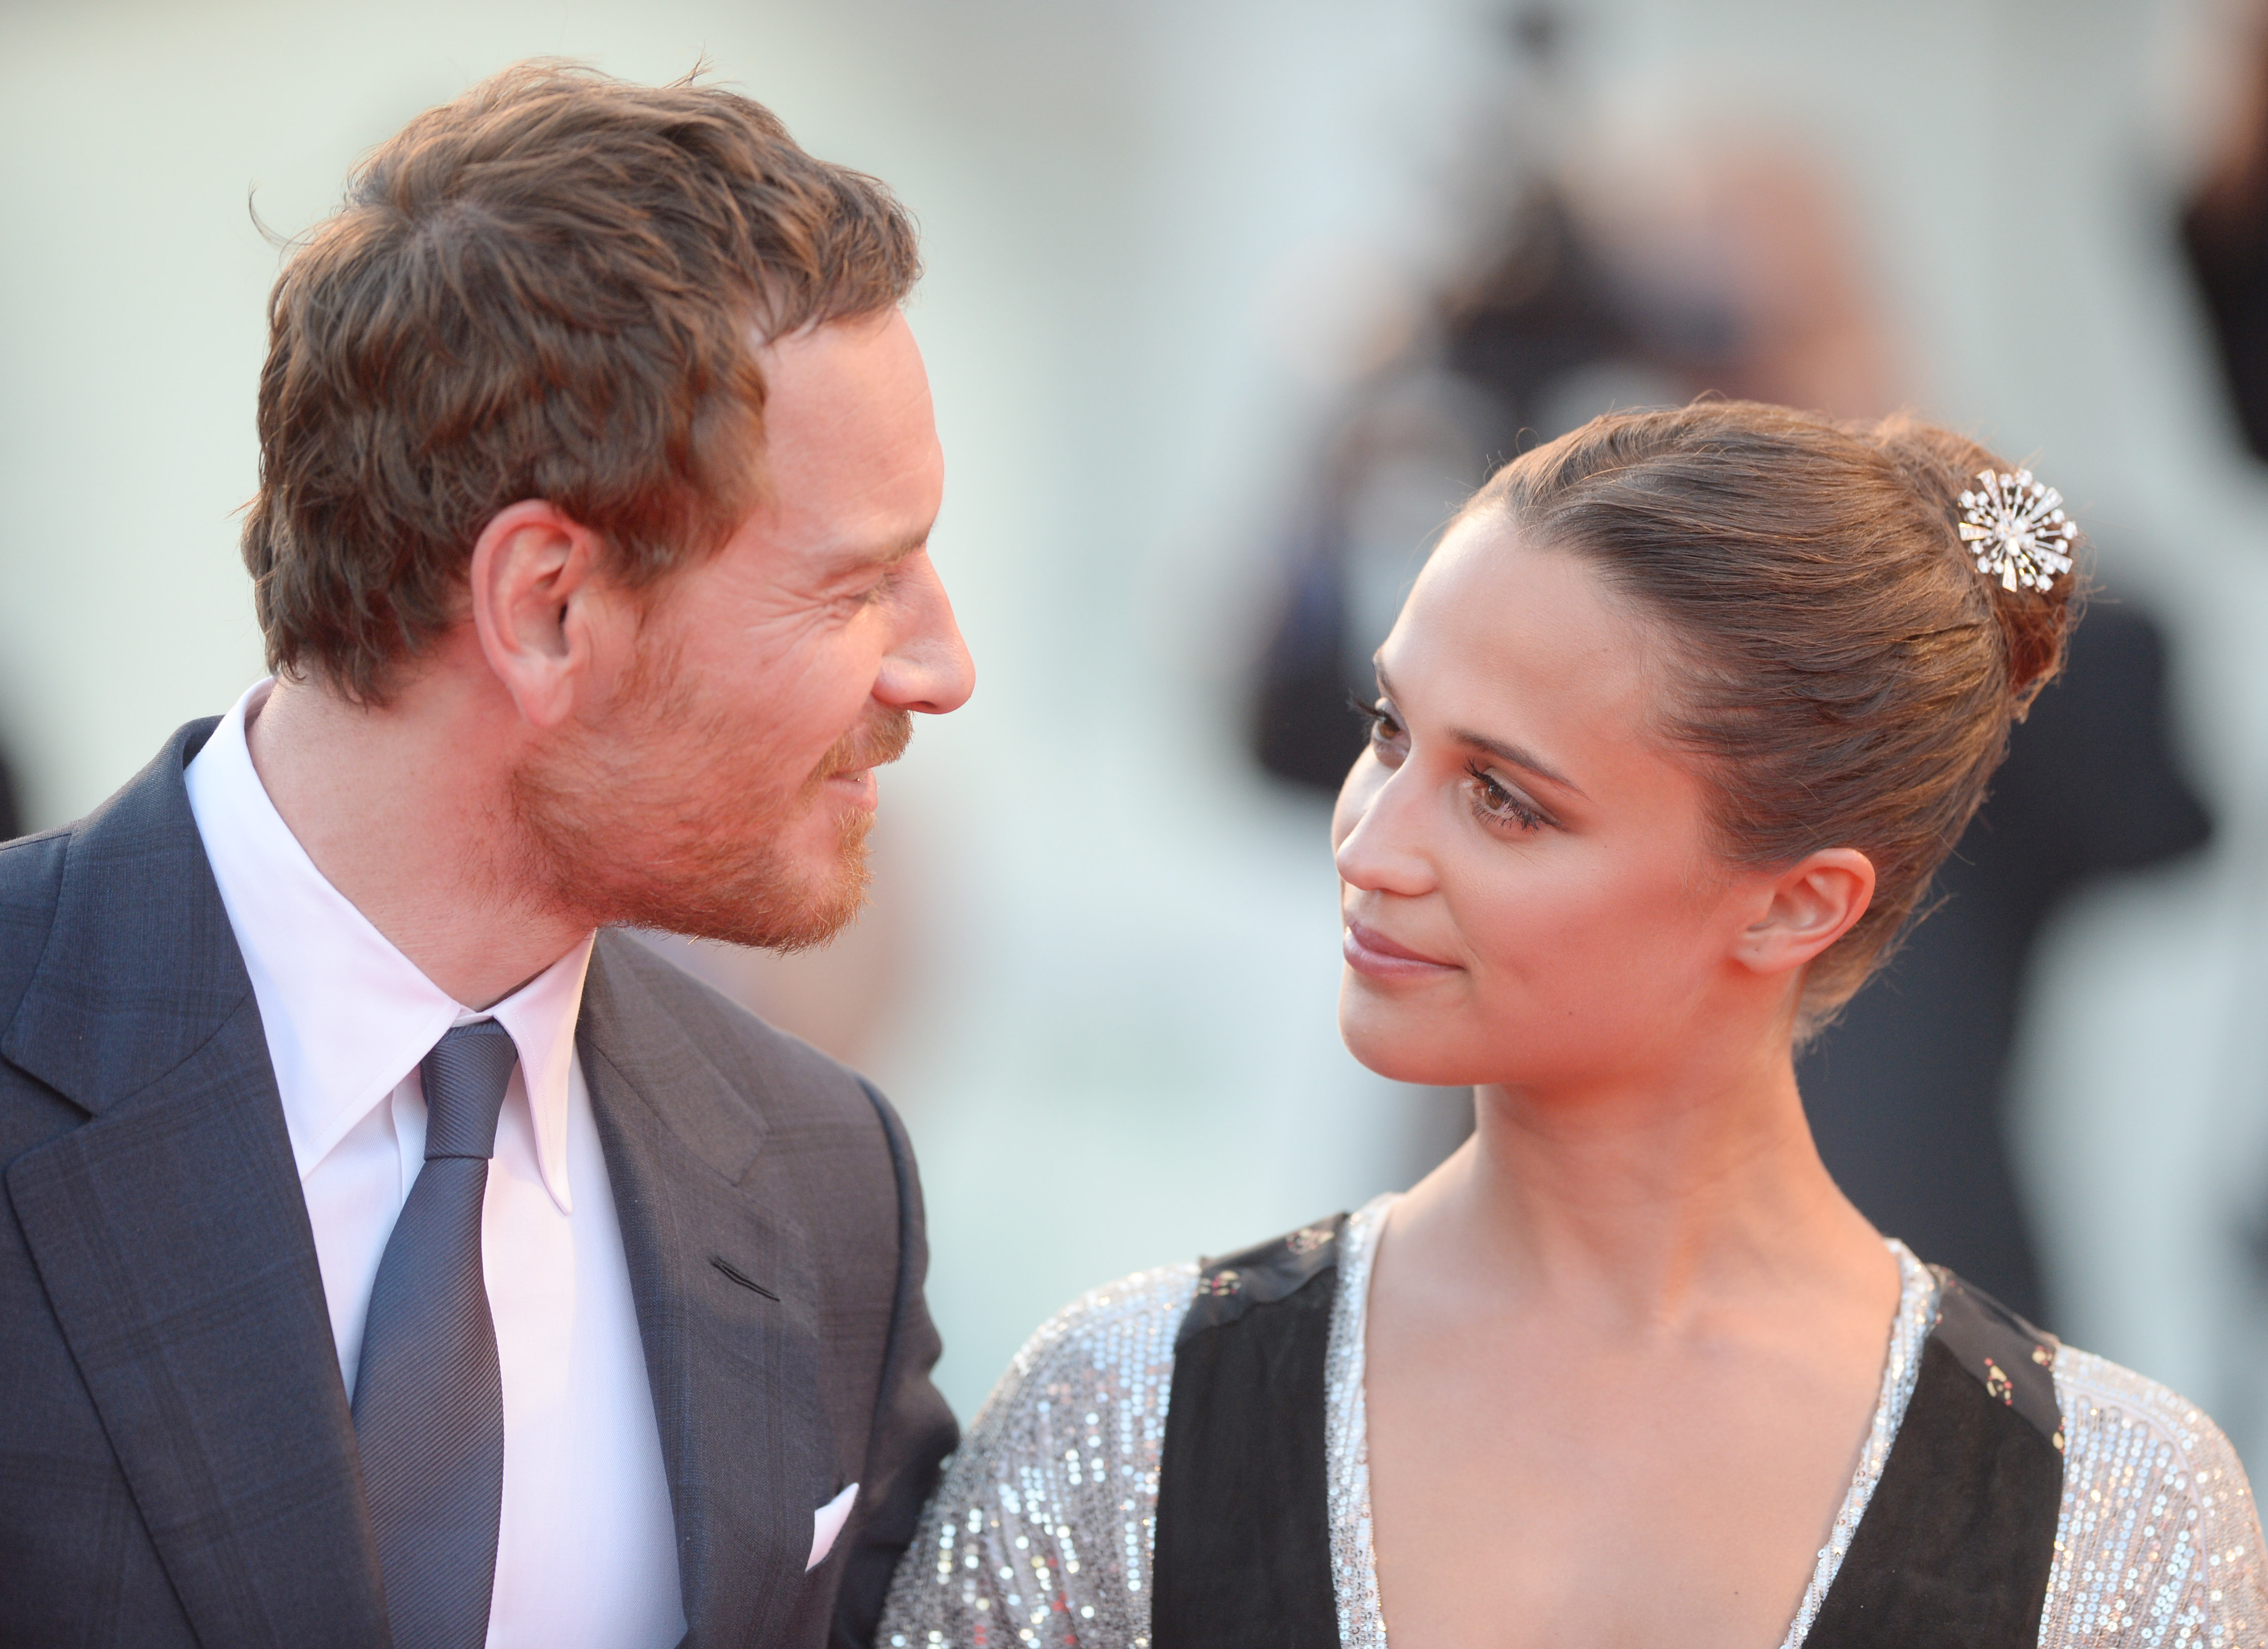 Alicia Vikander cradles a baby while at an airport with husband Michael  Fassbender in Paris